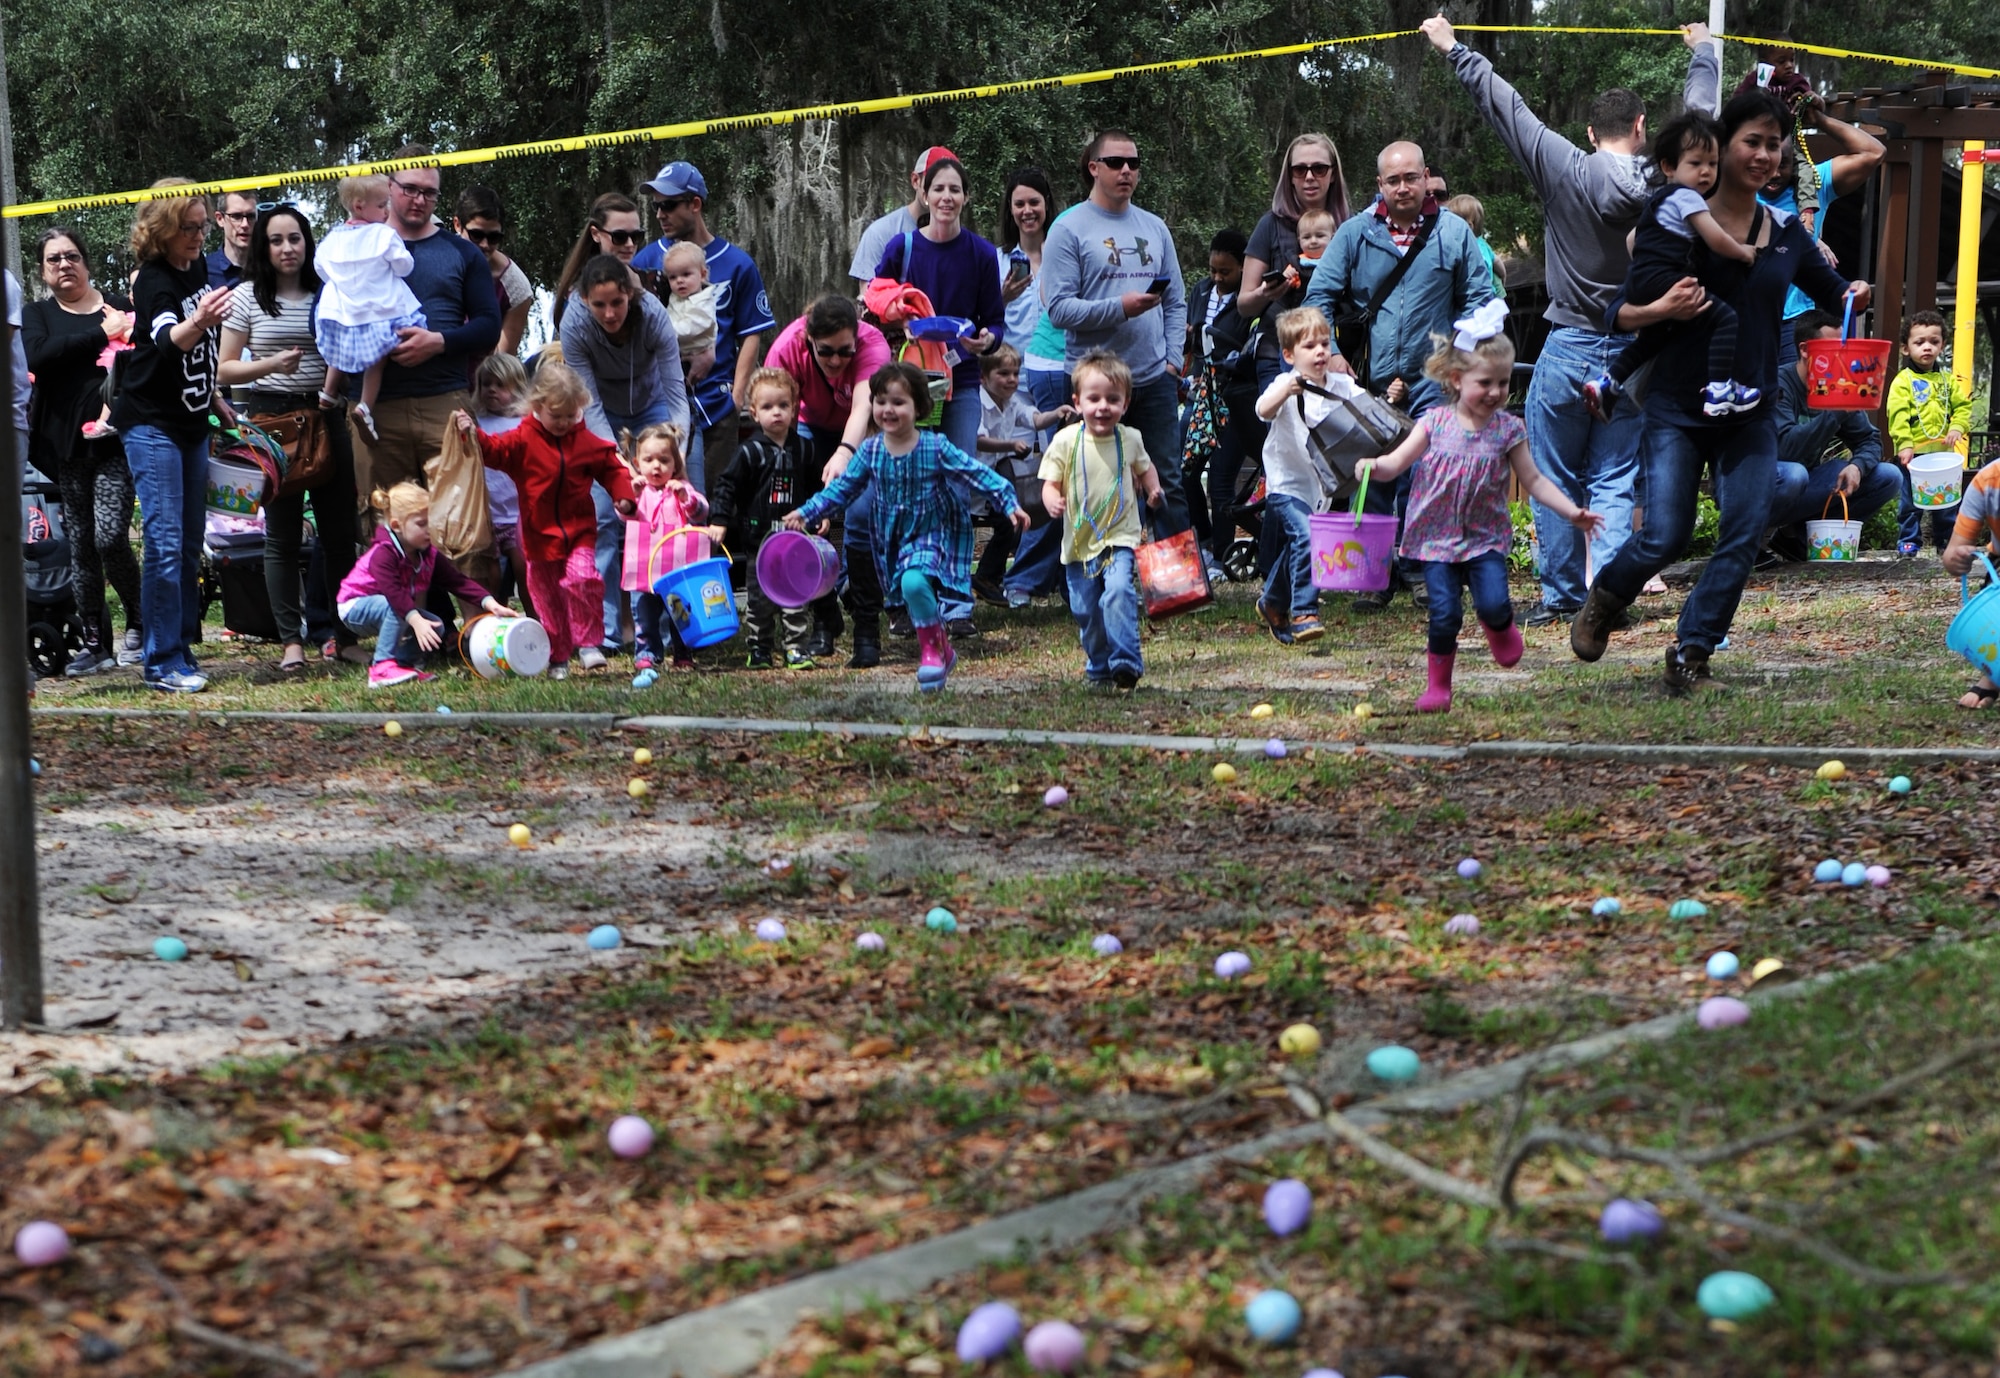 Children participate in an Easter egg hunt during Easter in the Park at the marina Mar. 26, 2016, Keesler Air Force Base, Miss. The event also included a youth fun run, arts and crafts, games and visits with the Easter Bunny. (U.S. Air Force photo by Kemberly Groue)